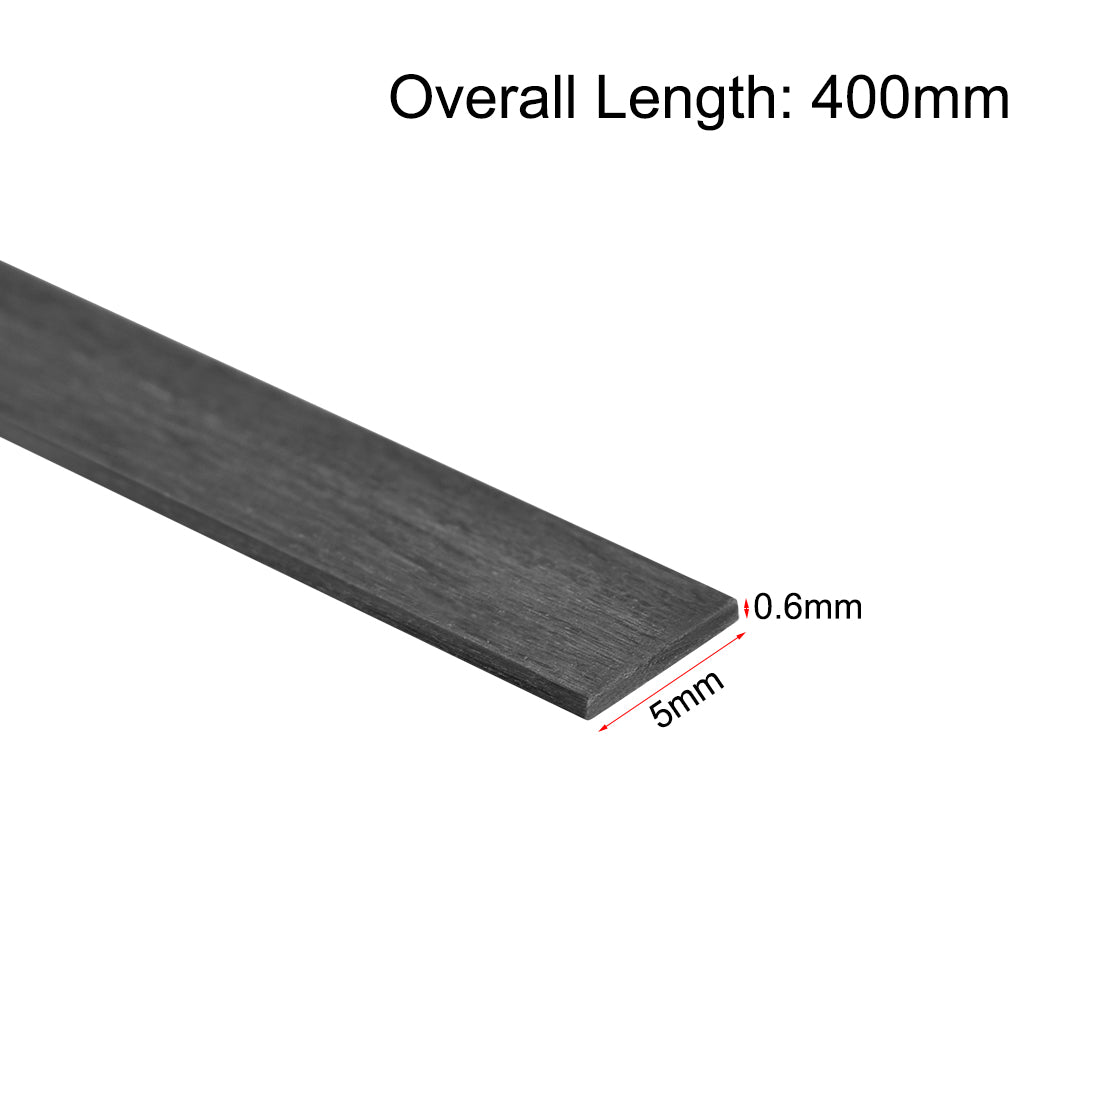 uxcell Uxcell Carbon Fiber Strip Bars 0.6x5mm 400mm Length Pultruded Carbon Fiber Strips for Kites, RC Airplane 1 Pcs